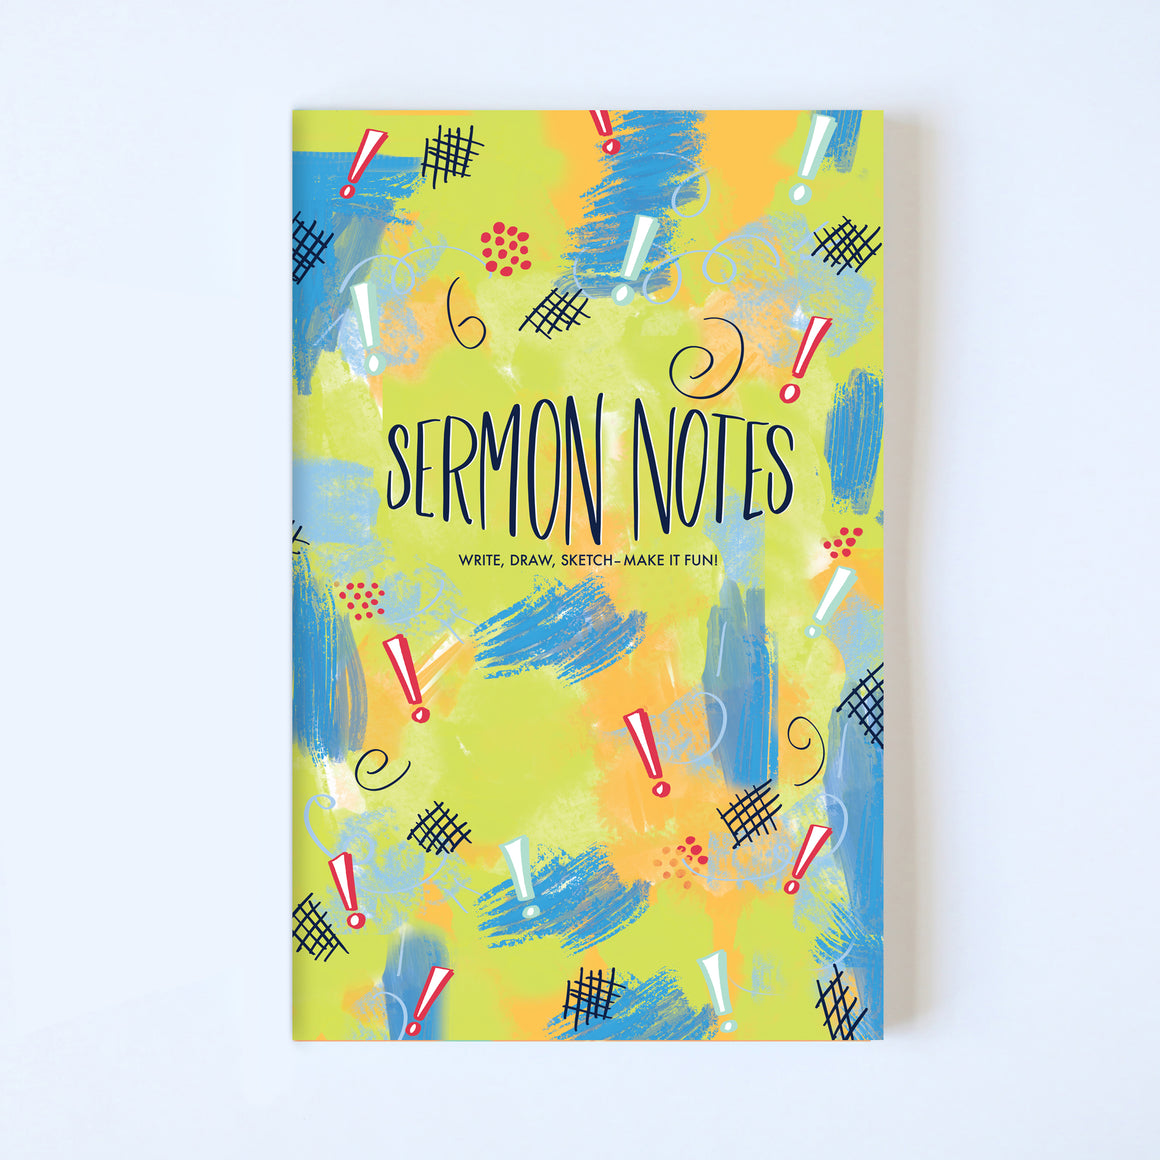 Exclamation Sermon Notes